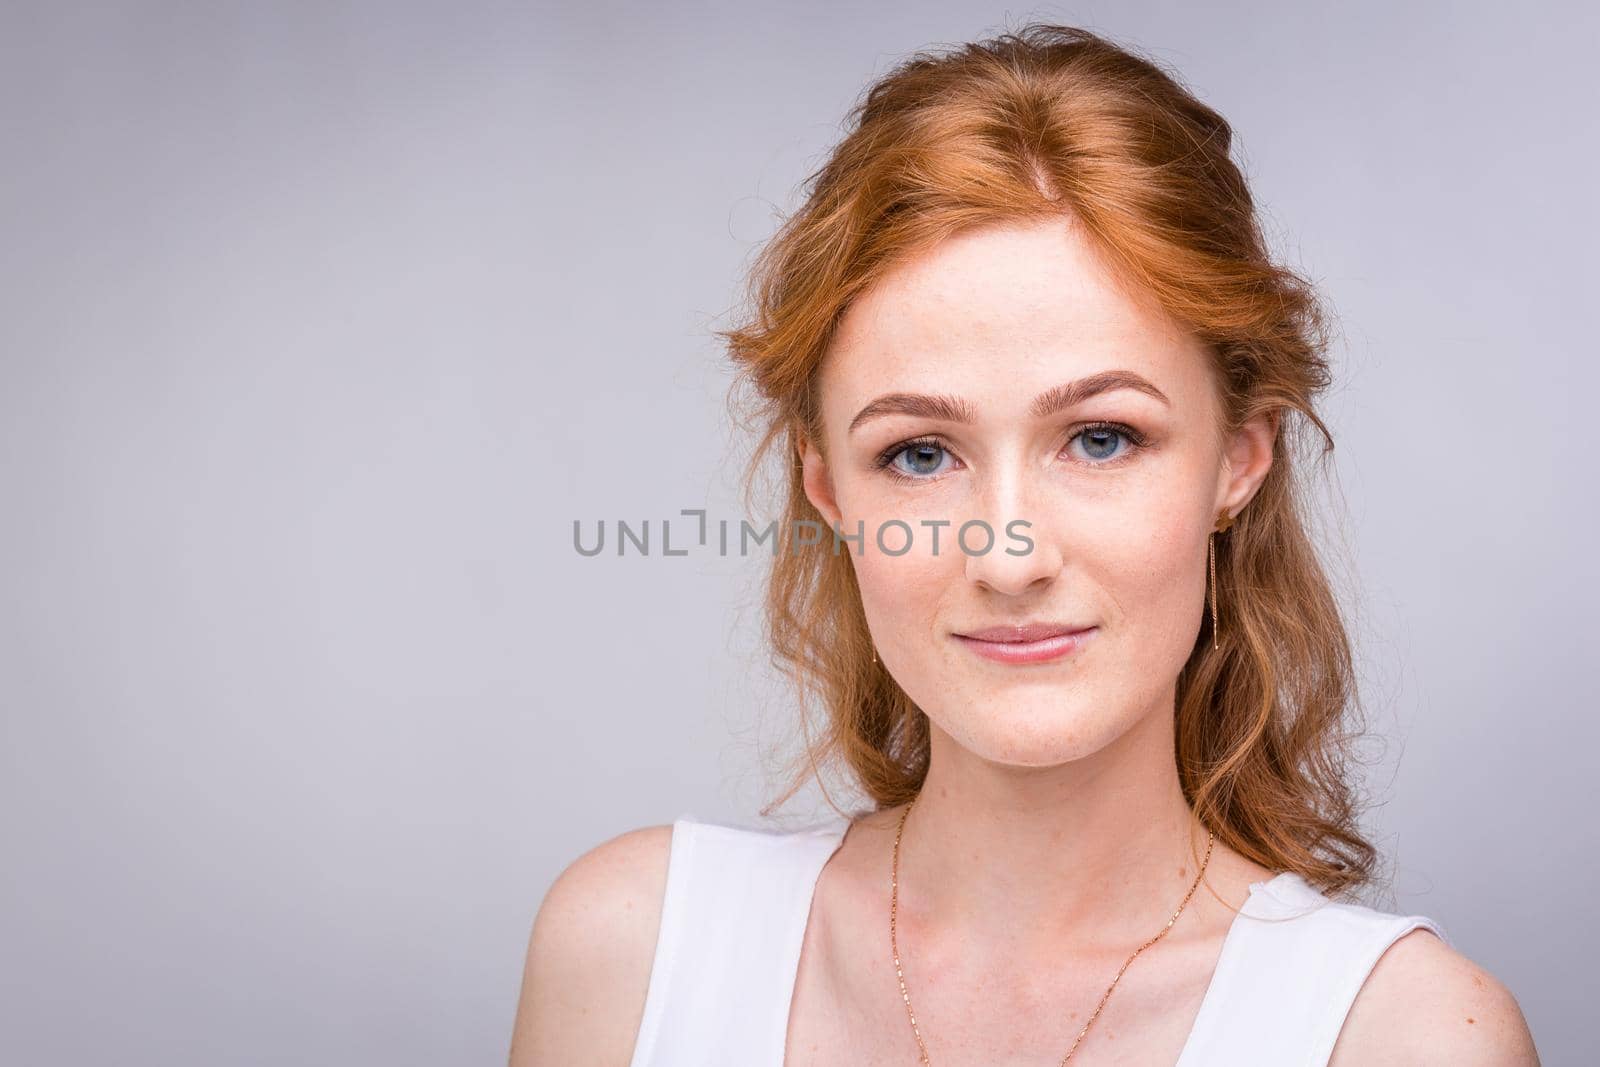 Closeup portrait young, beautiful business woman, student with lred, curly hair and freckles on face on gray background in the studio. Dressed in white blouse with short sleeves about open shoulders.